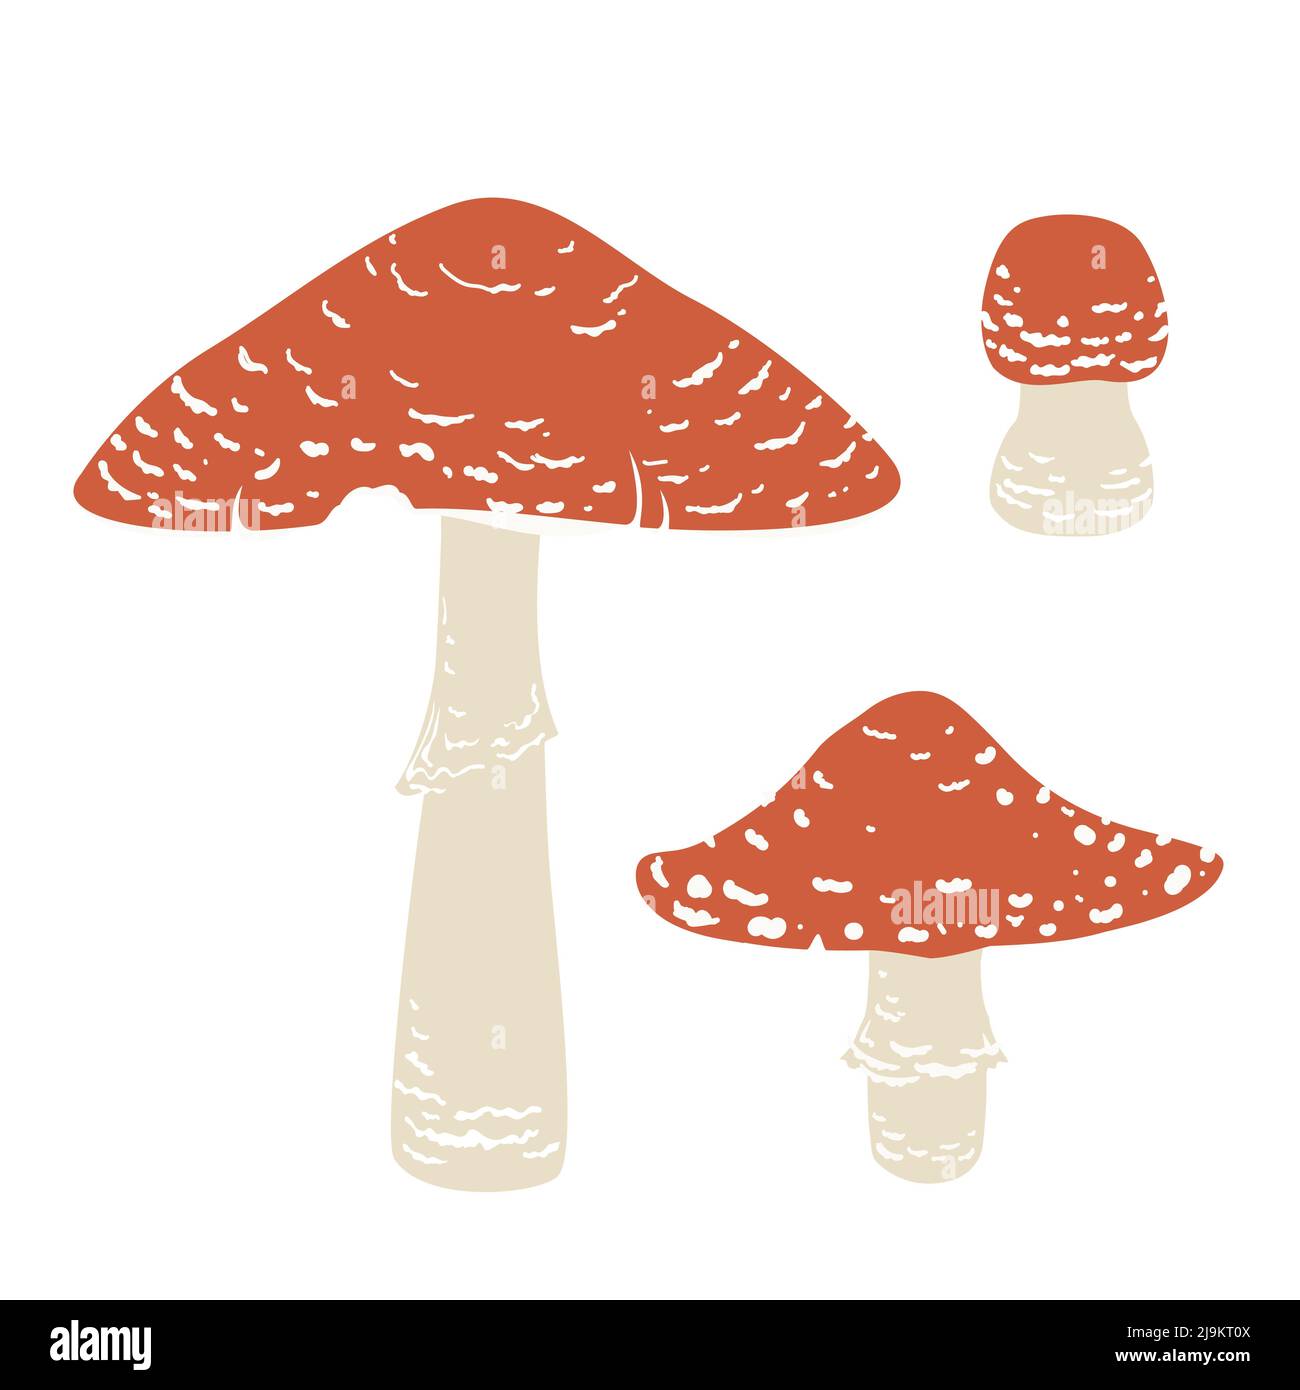 Fly aragic set, toadstool cute inedible mushrooms. Amanita muscaria. Vector illustration in cartoon style isolated on white background Stock Vector